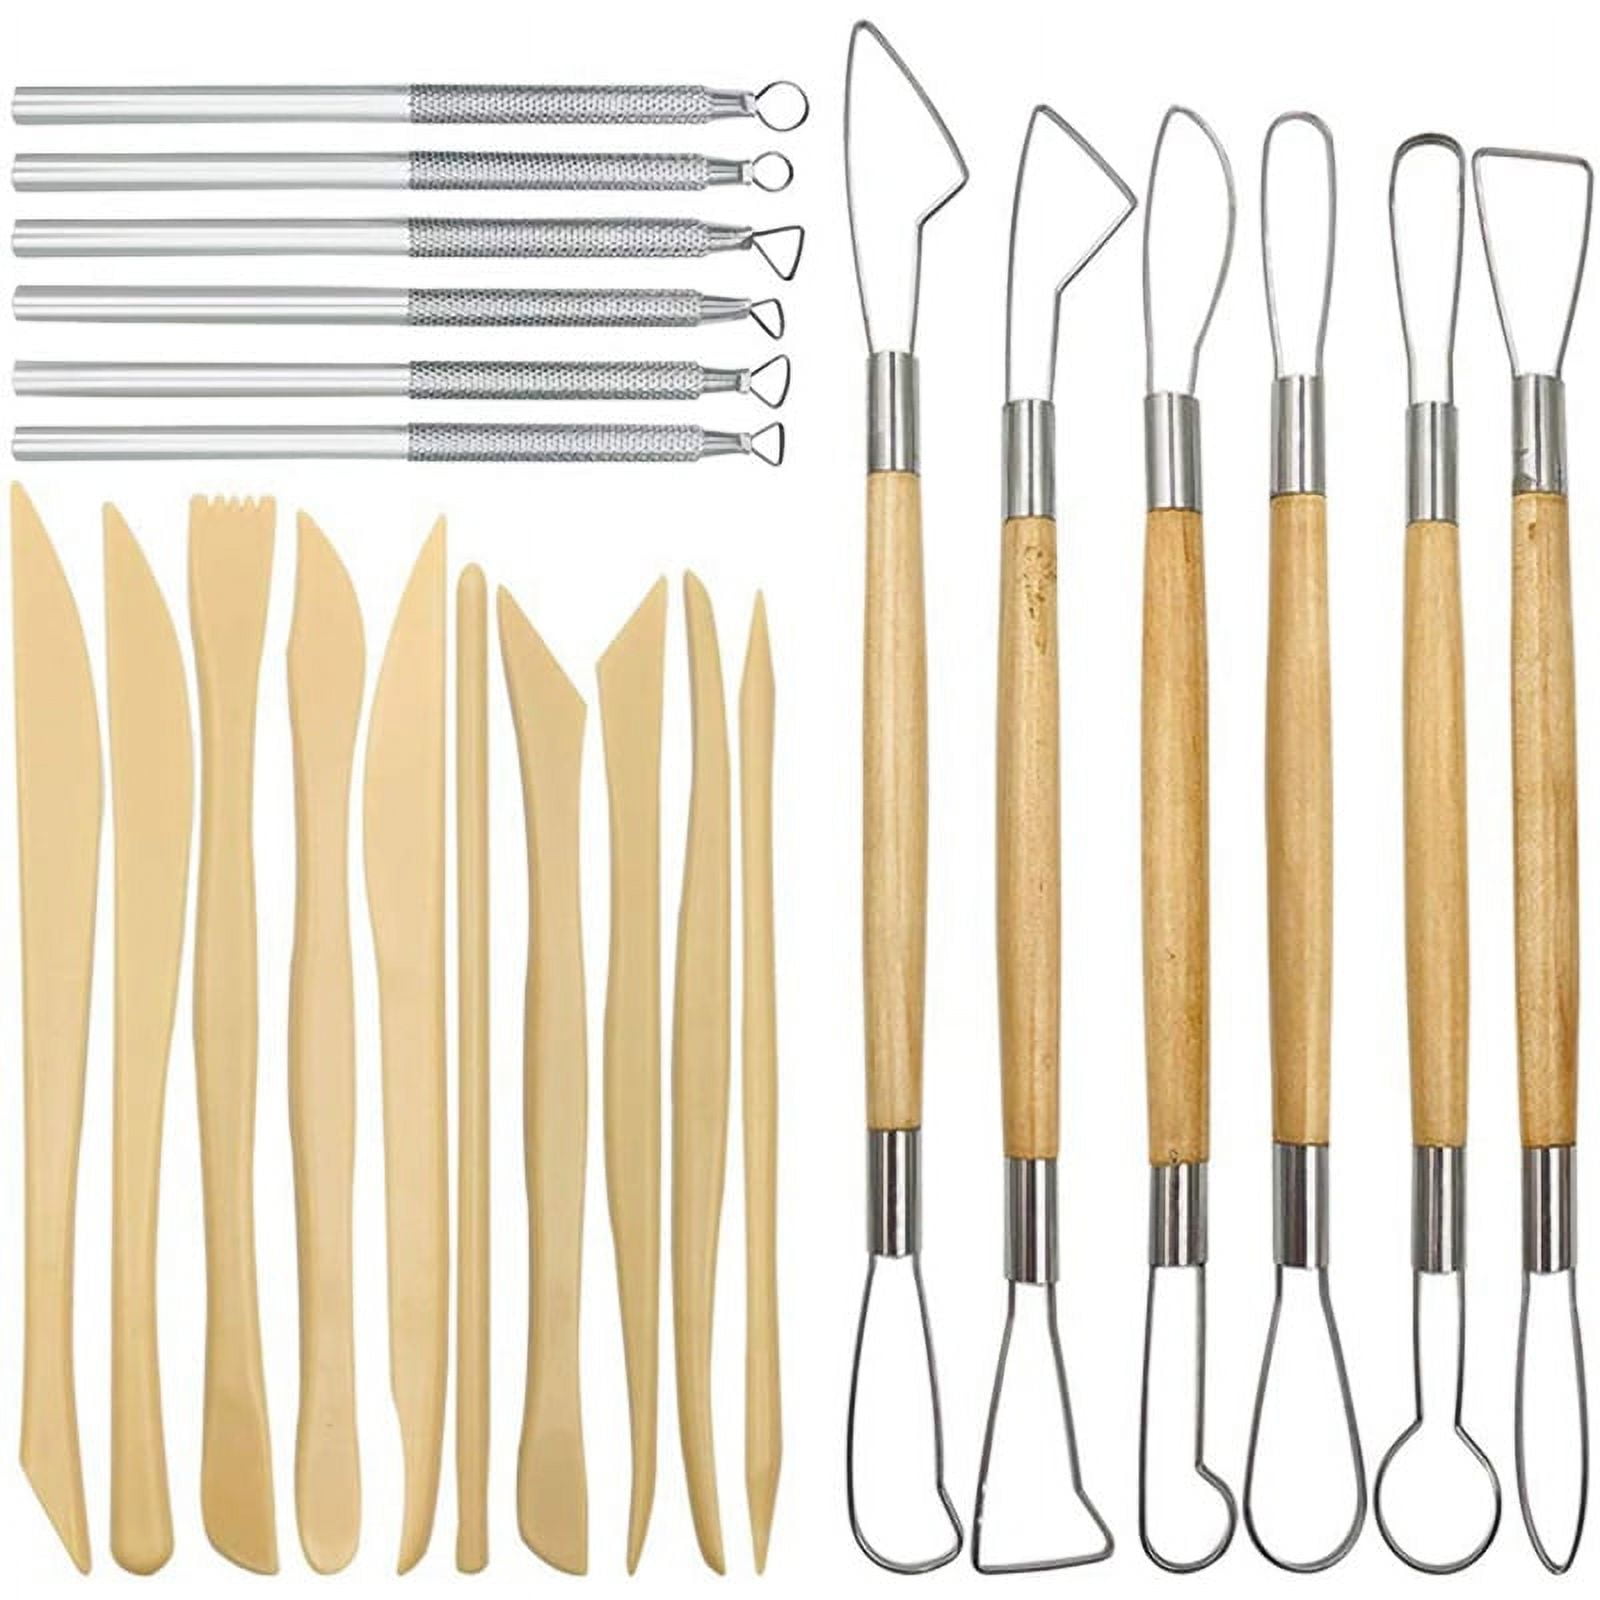 Wholesale clay carving tools With Ideal Features For Work